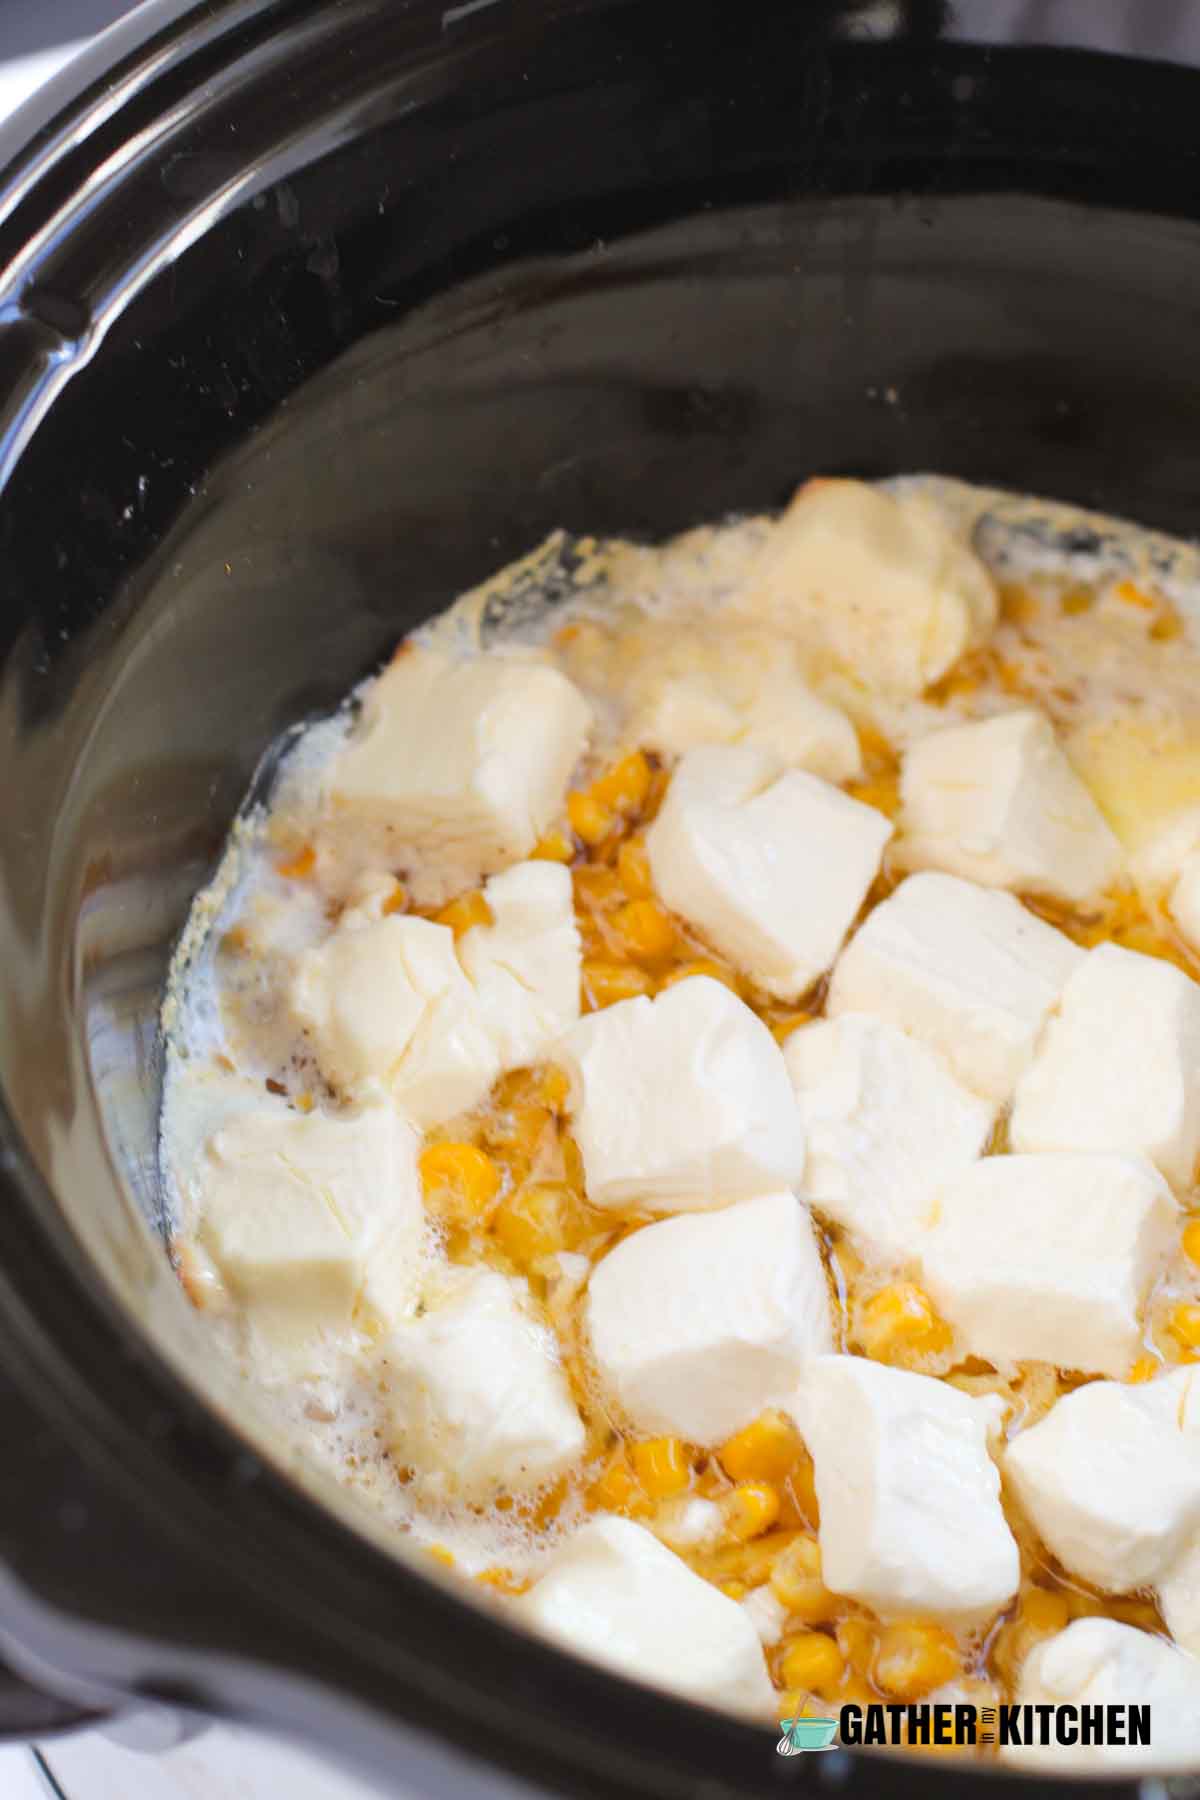 Corn cooked in the slow cooker, butter is melted and cream cheese is incredibly soft.